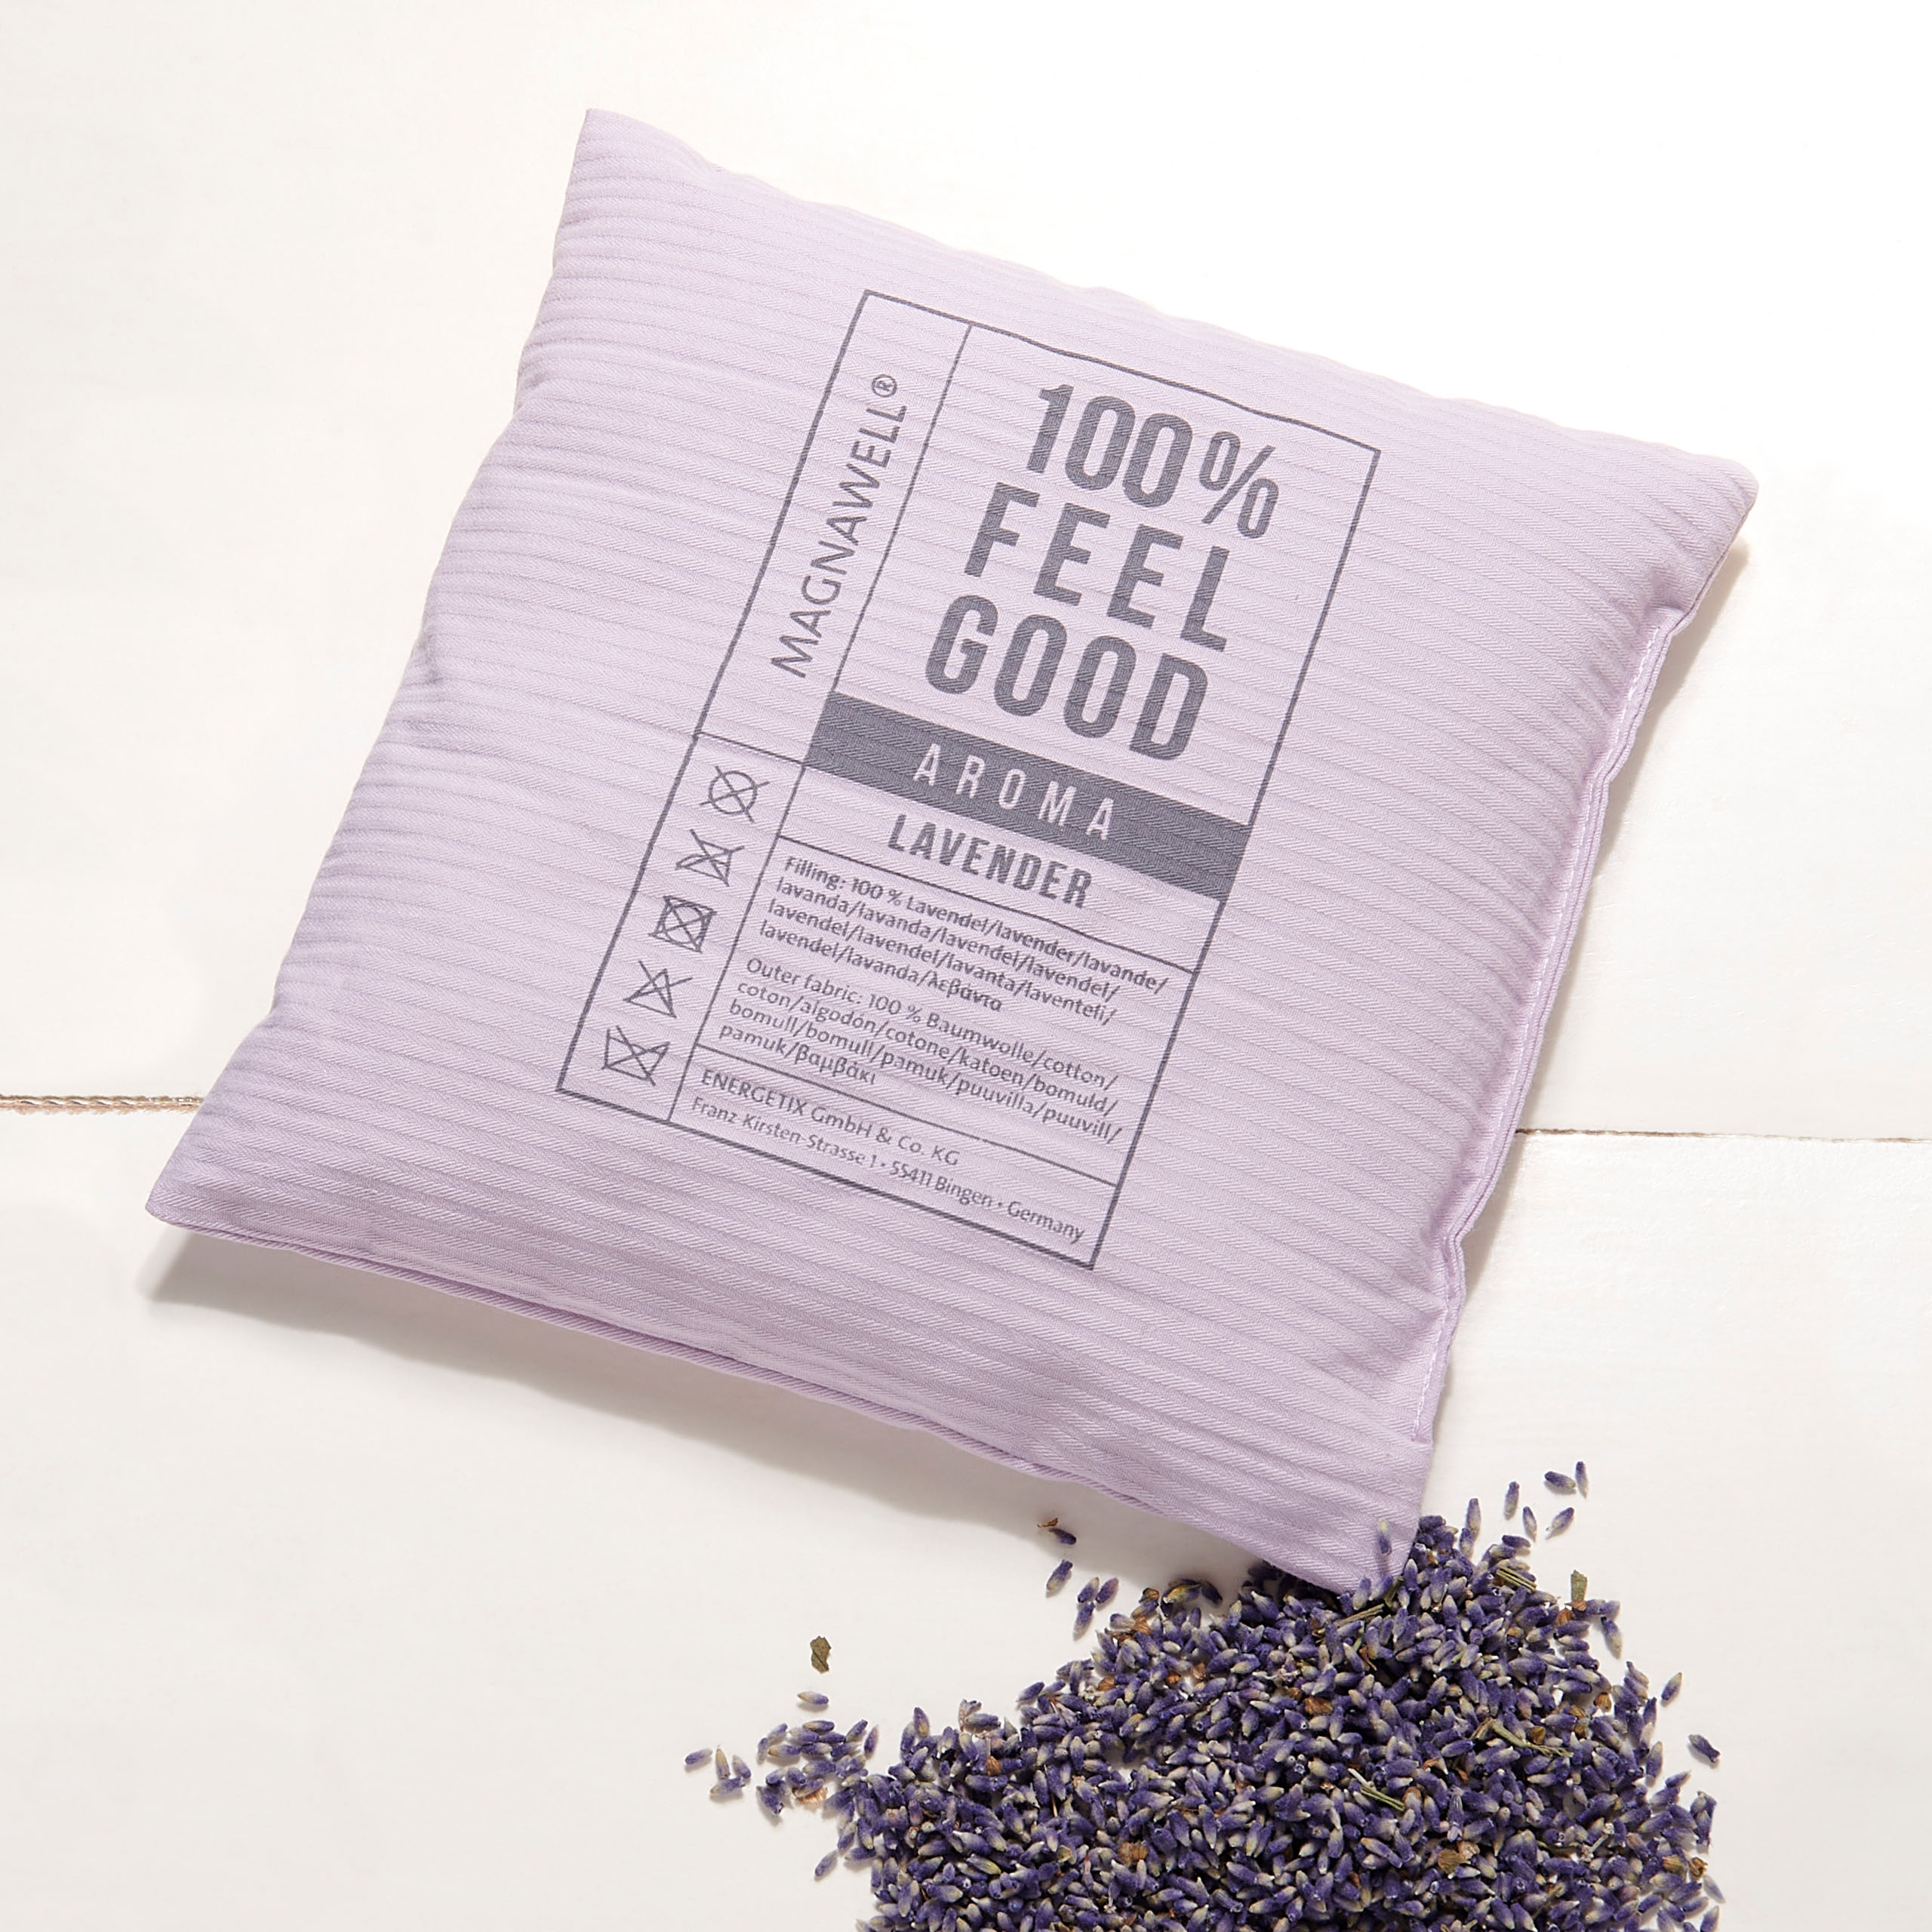 Relaxation cushion AROMA for 100 % Feel Good